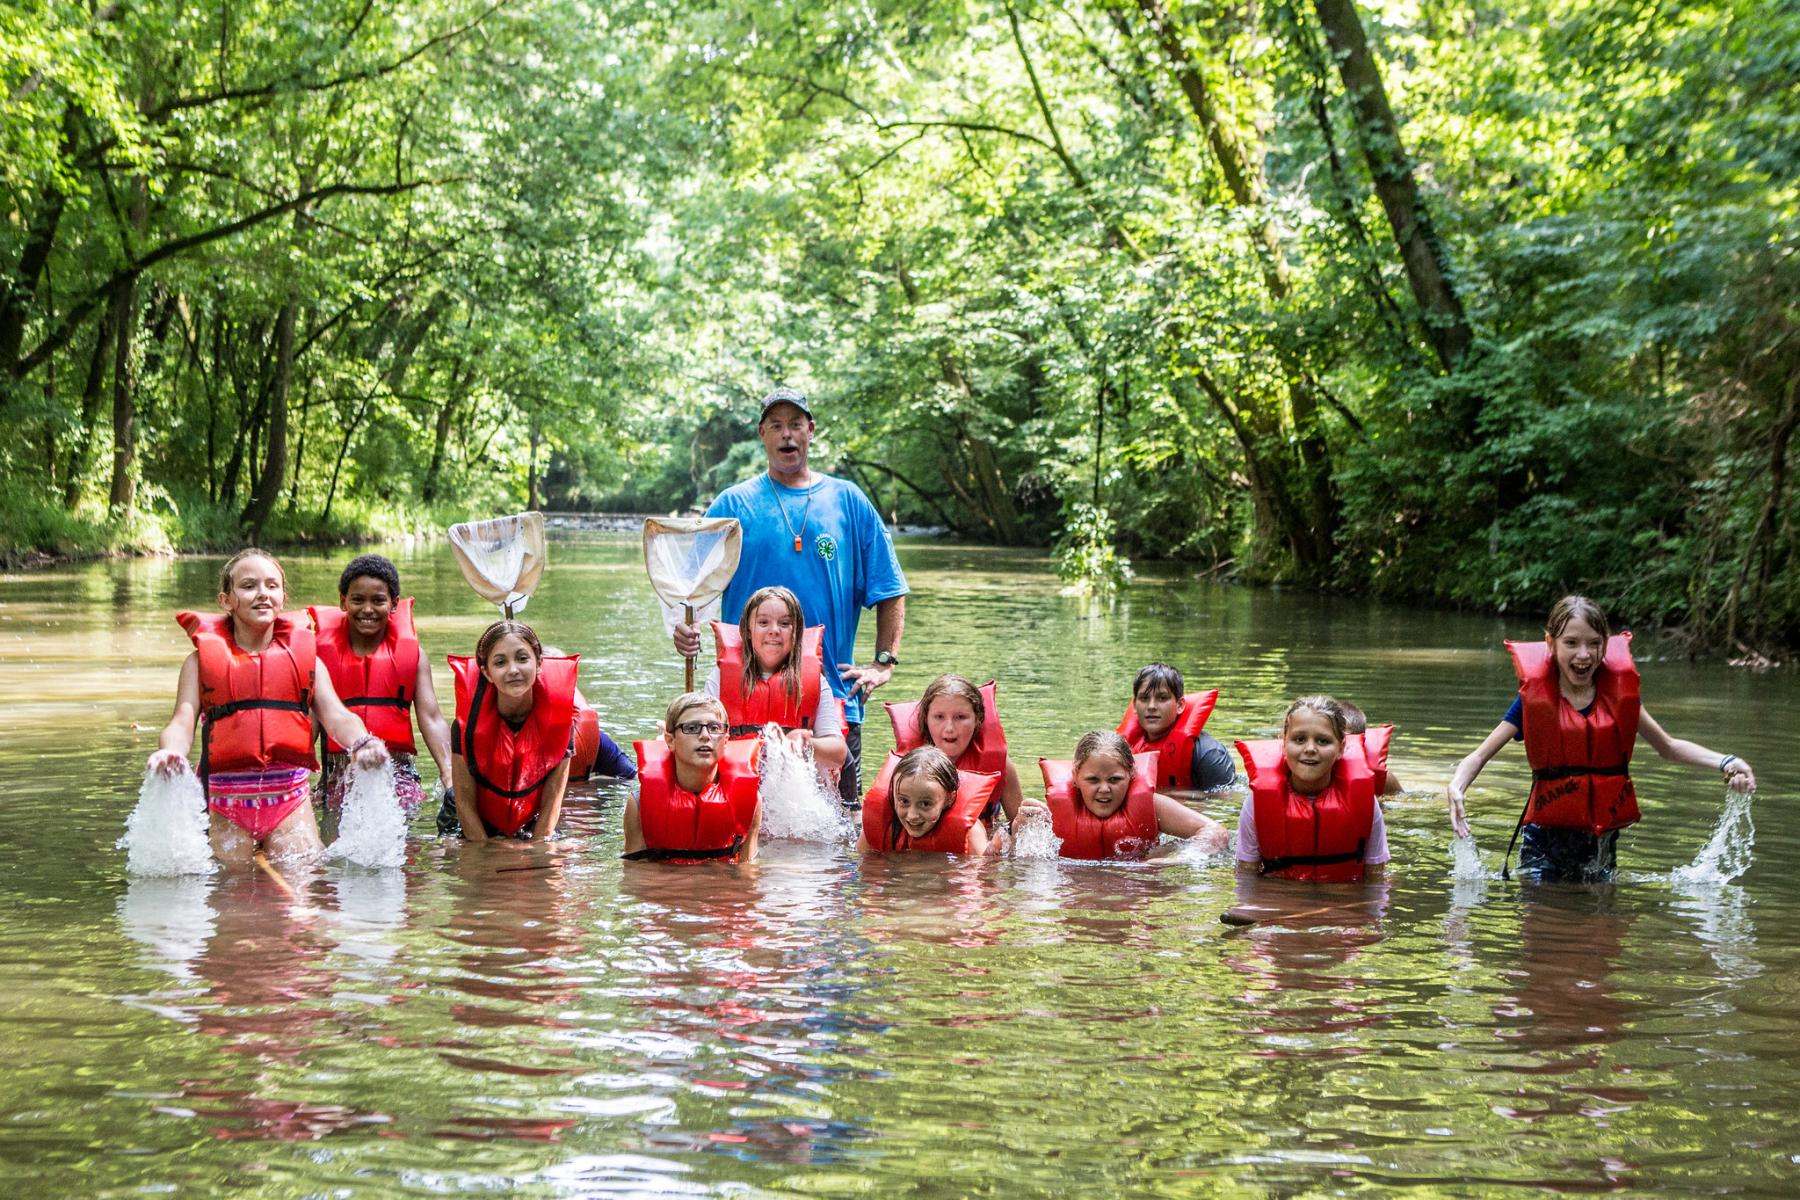 adult stands behind children wearing red life jackets playing in river surrounded by green foliage